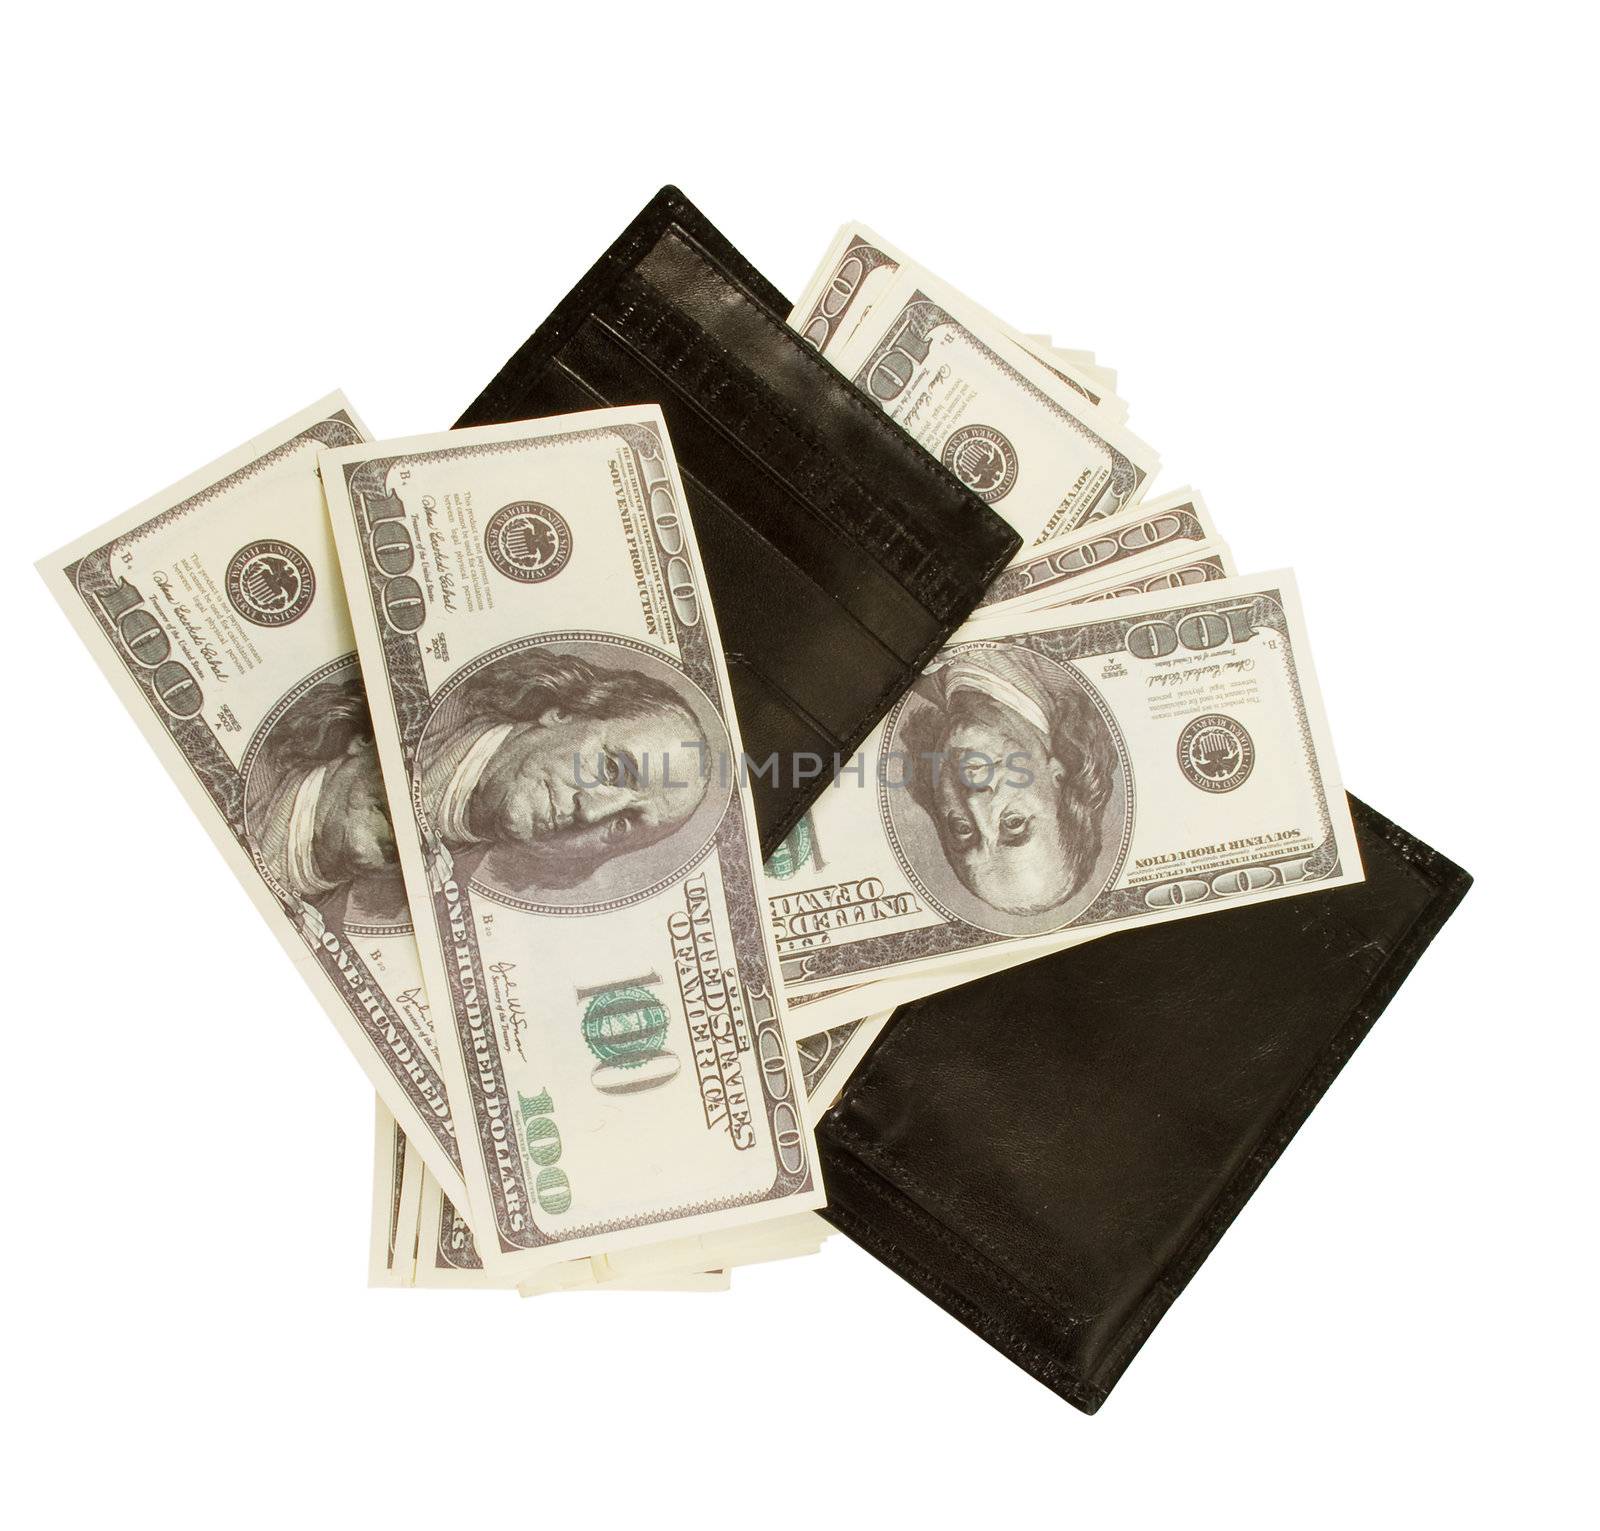 Black purse with lots of notes on one hundred dollars by BIG_TAU